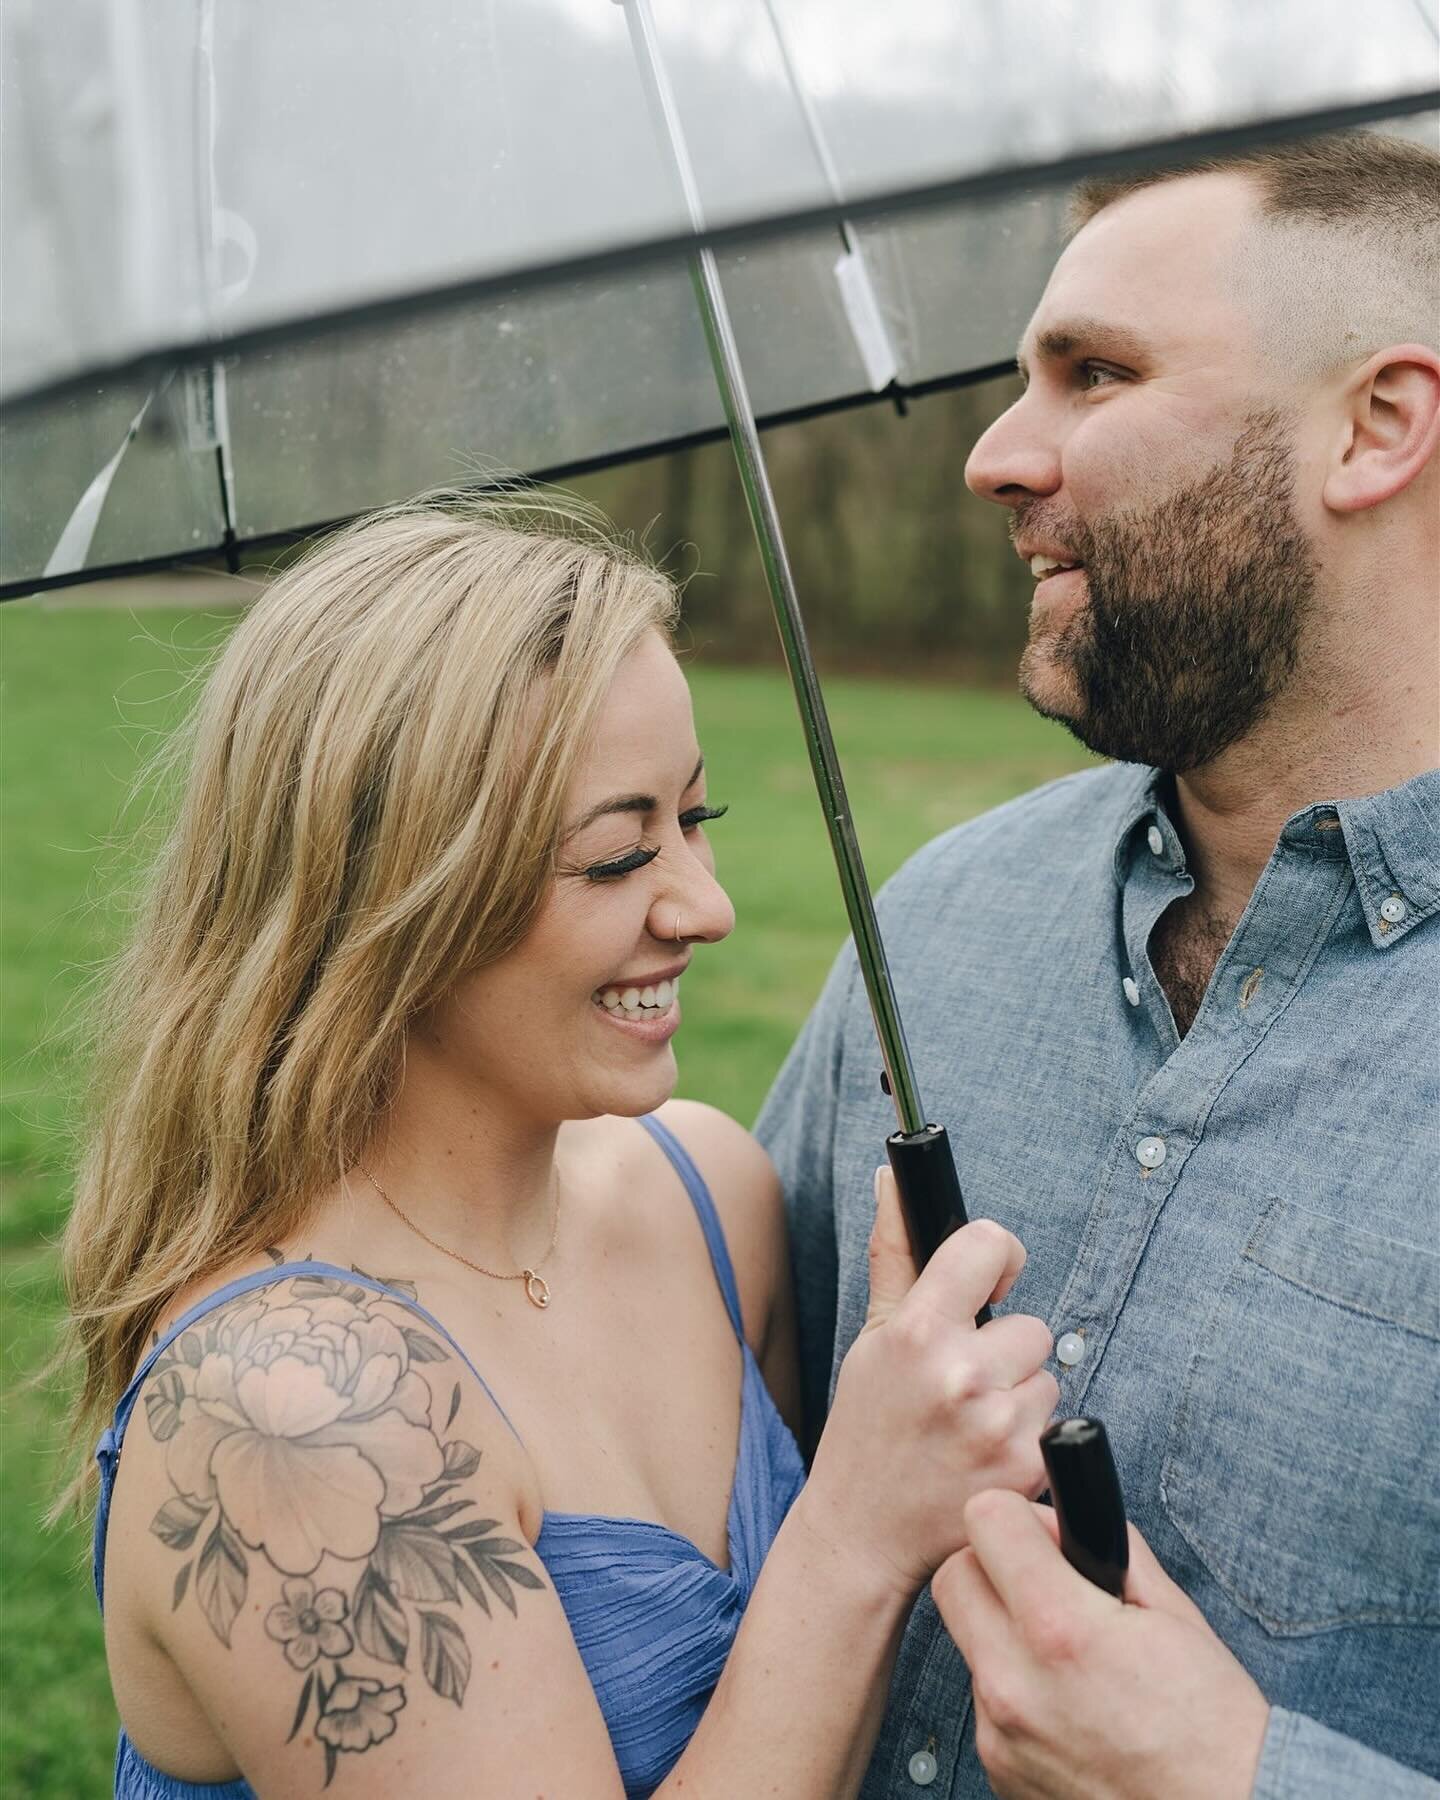 Gabby + Connor took me to one of their favorite places for their engagement session - the place they went before Connor proposed! I loved exploring with them &amp; watching them interact in a place that is so special to them. Their session will be a 